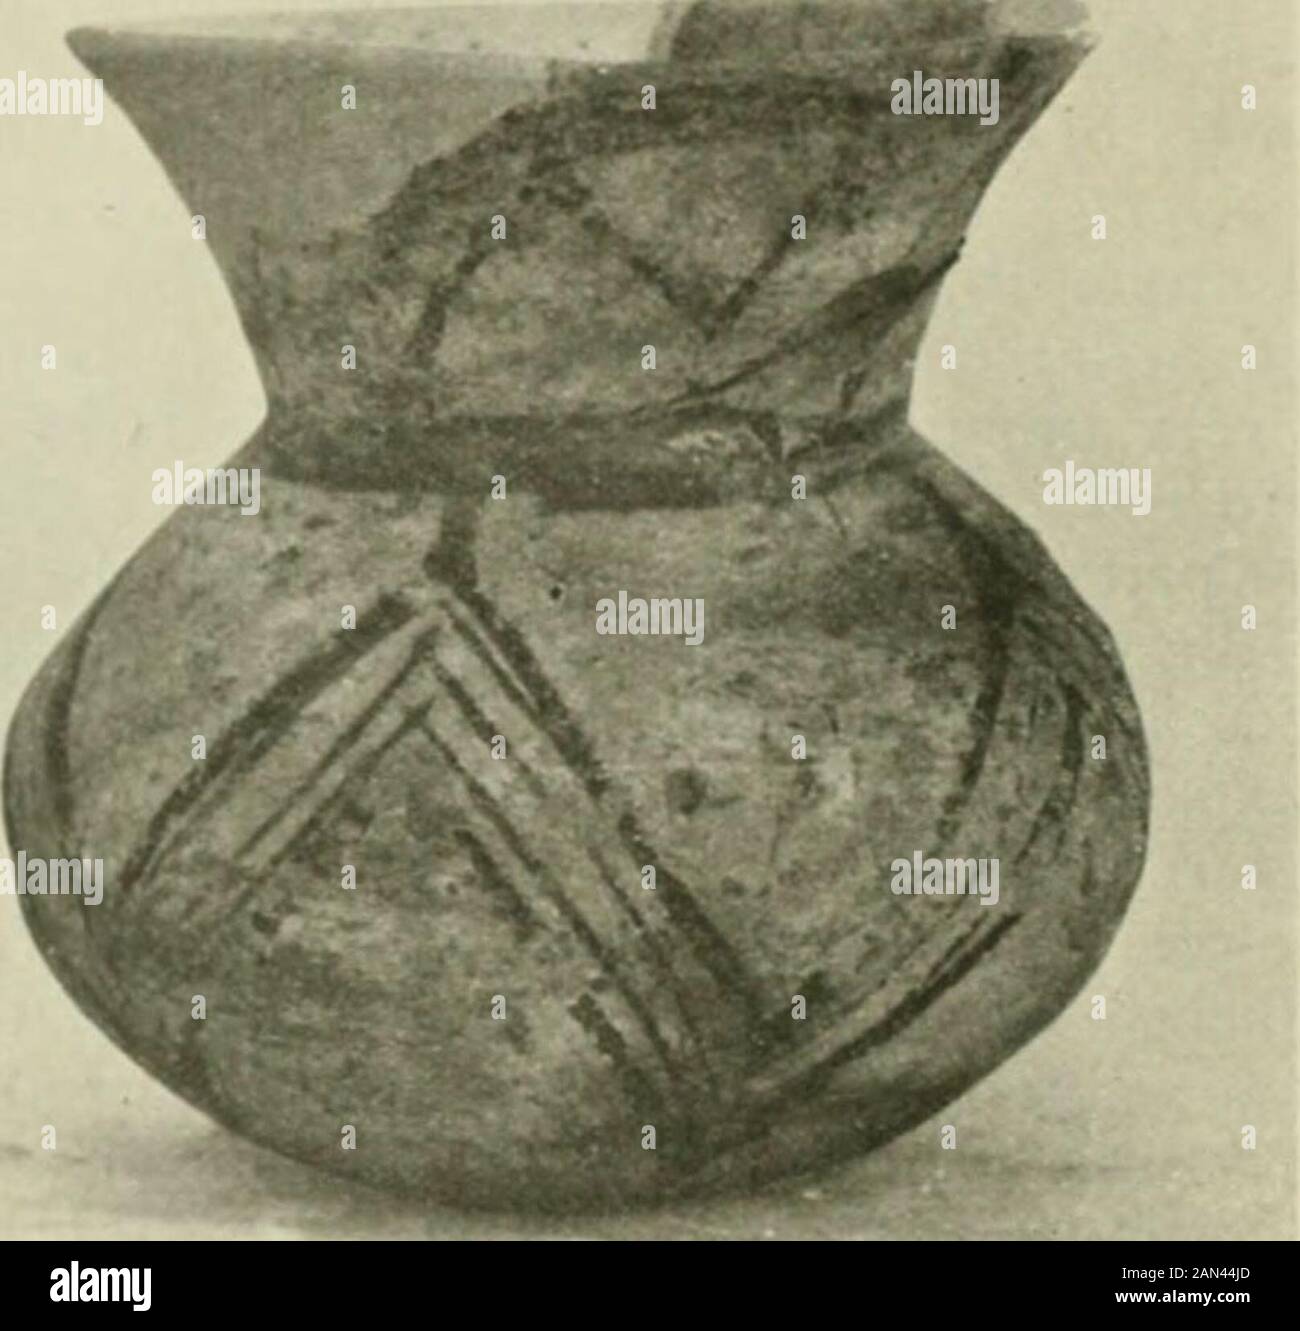 Prehistoric Thessaly; being some account of recent excavations and explorations in north-eastern Greece from Lake Kopais to the borders of Macedonia . e-lipped bowls narrowing sharply towardsthe bottom, iMg. 584- from , {c) wide-necked and low-rimmed jars narrowingsharply towards the bottom, cf. A i!, p. 238, Fig. 133, occasionally with handles Tsiindas found sonic licrc, ^ 2. pp. 23S ff., Fijjs. 134 136, p. 242. Ki.n. 143. I02 on the shoulder, (^/) jiij^s (?) with vertical handles running from lip to shoulder(Fij^r. y^a. But since the l)ovvl shown in Fig. 58 ^ is the most completeexample it Stock Photo